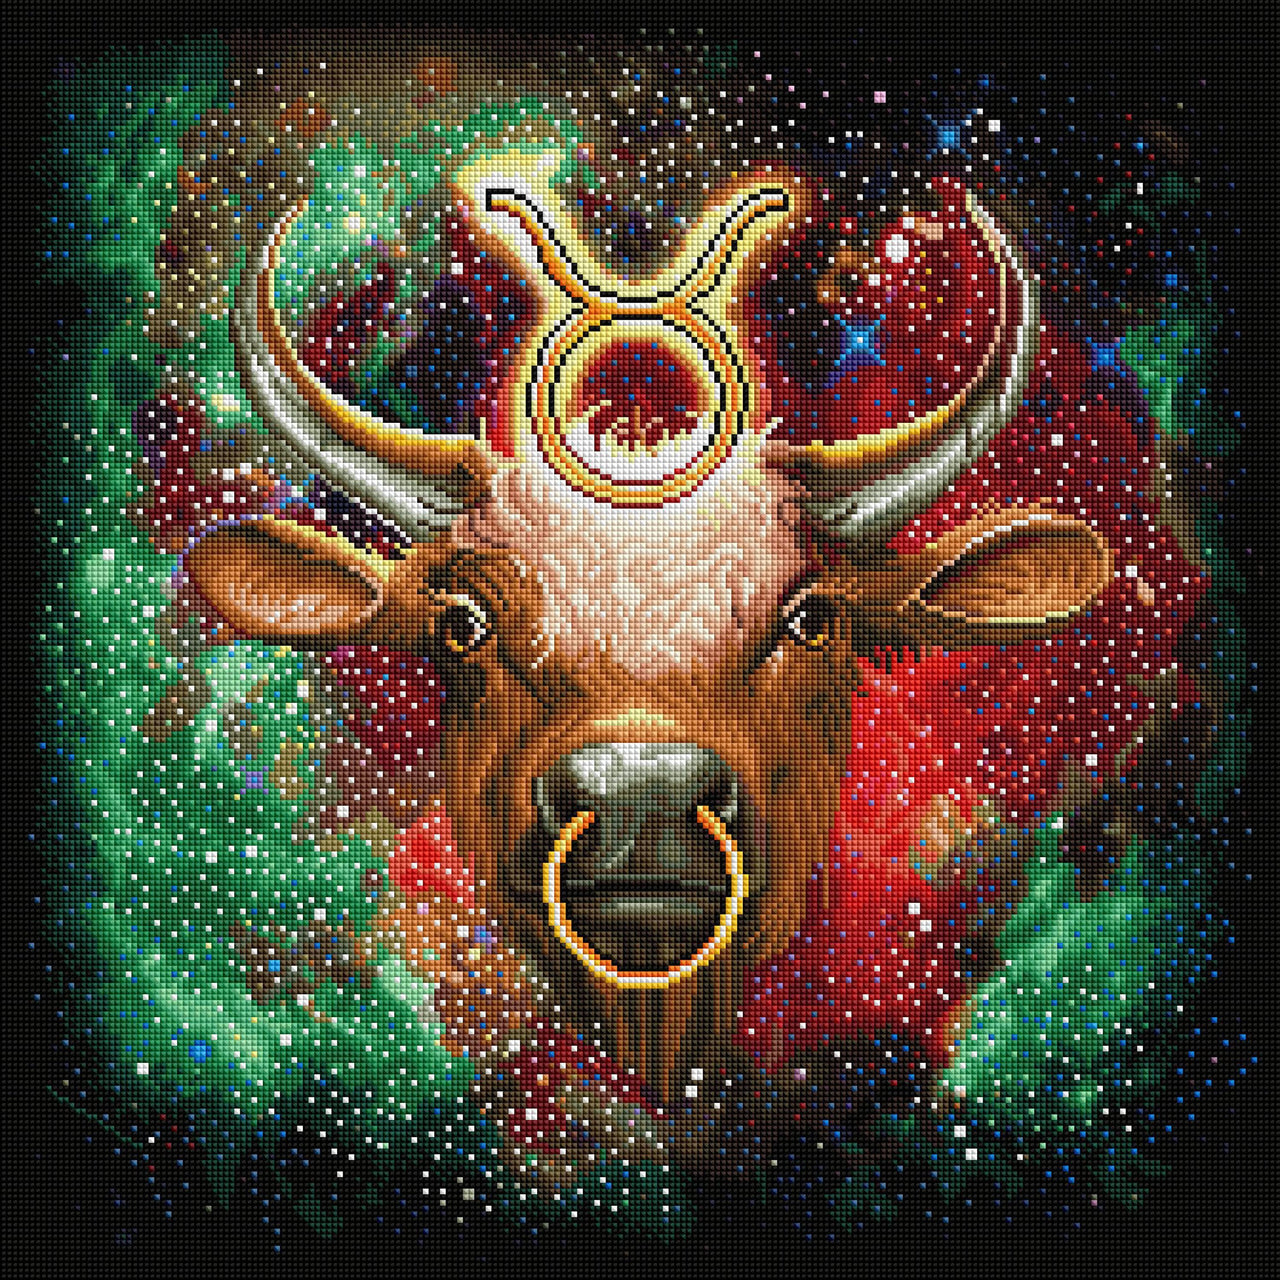 Diamond Painting Taurus 22" x 22" (55.8cm x 55.8cm) / Square with 58 Colors including 4 ABs / 50,176